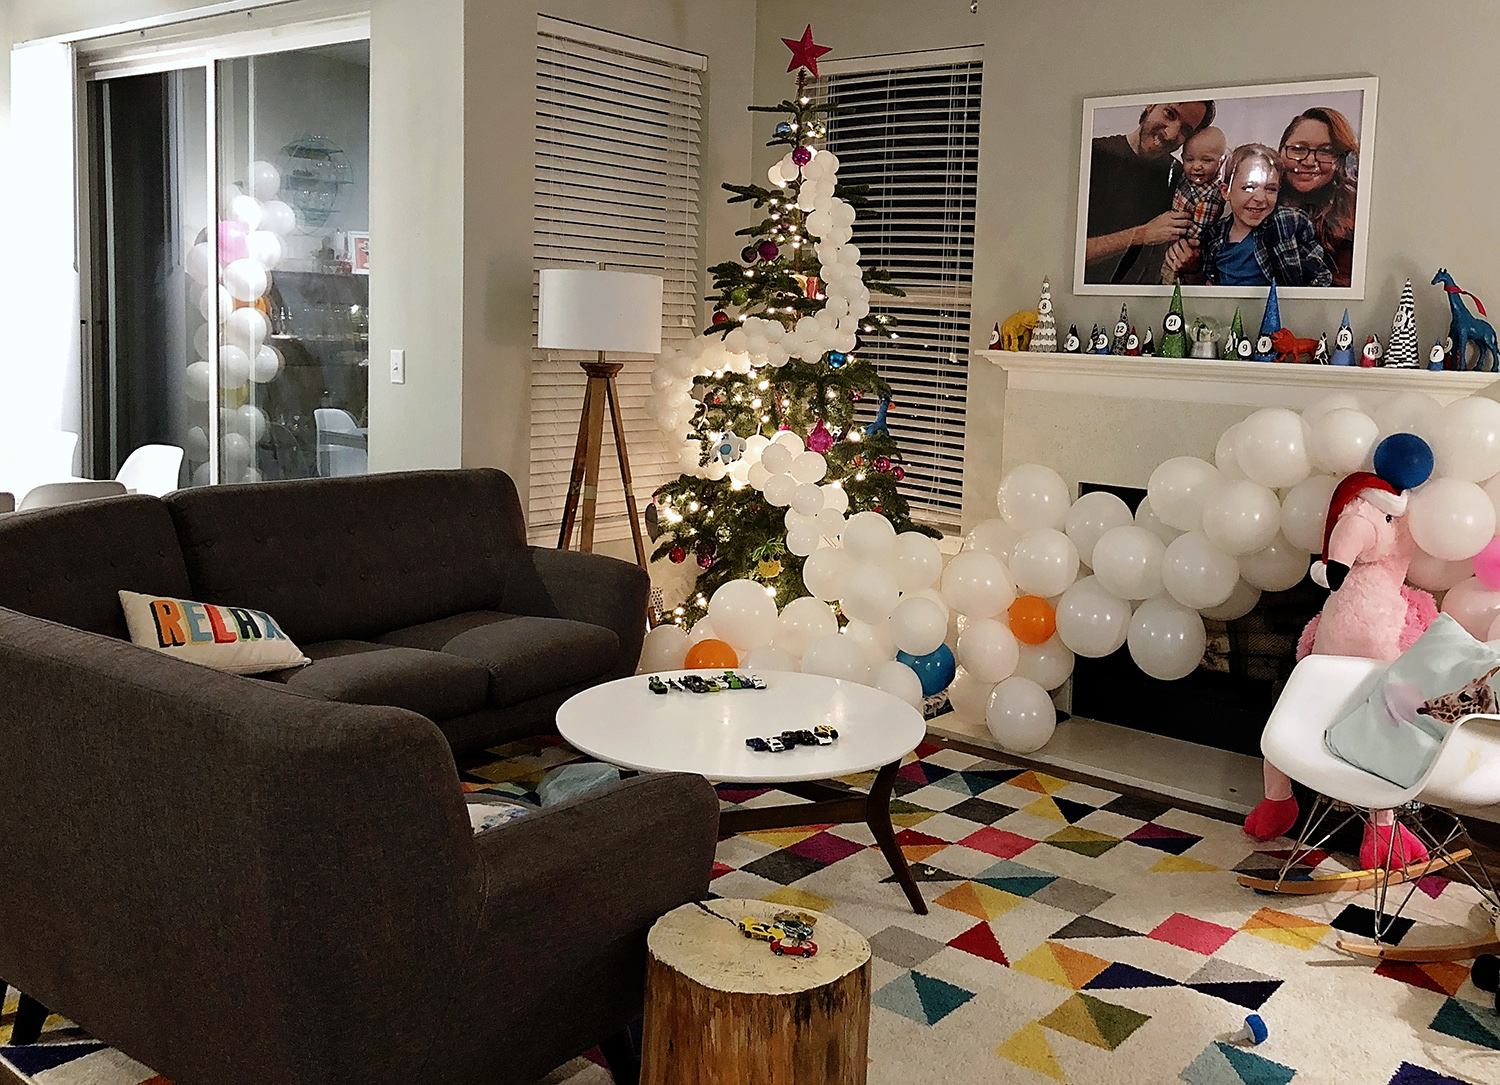 Balloon Christmas Tree Decor | A Well Crafted Party